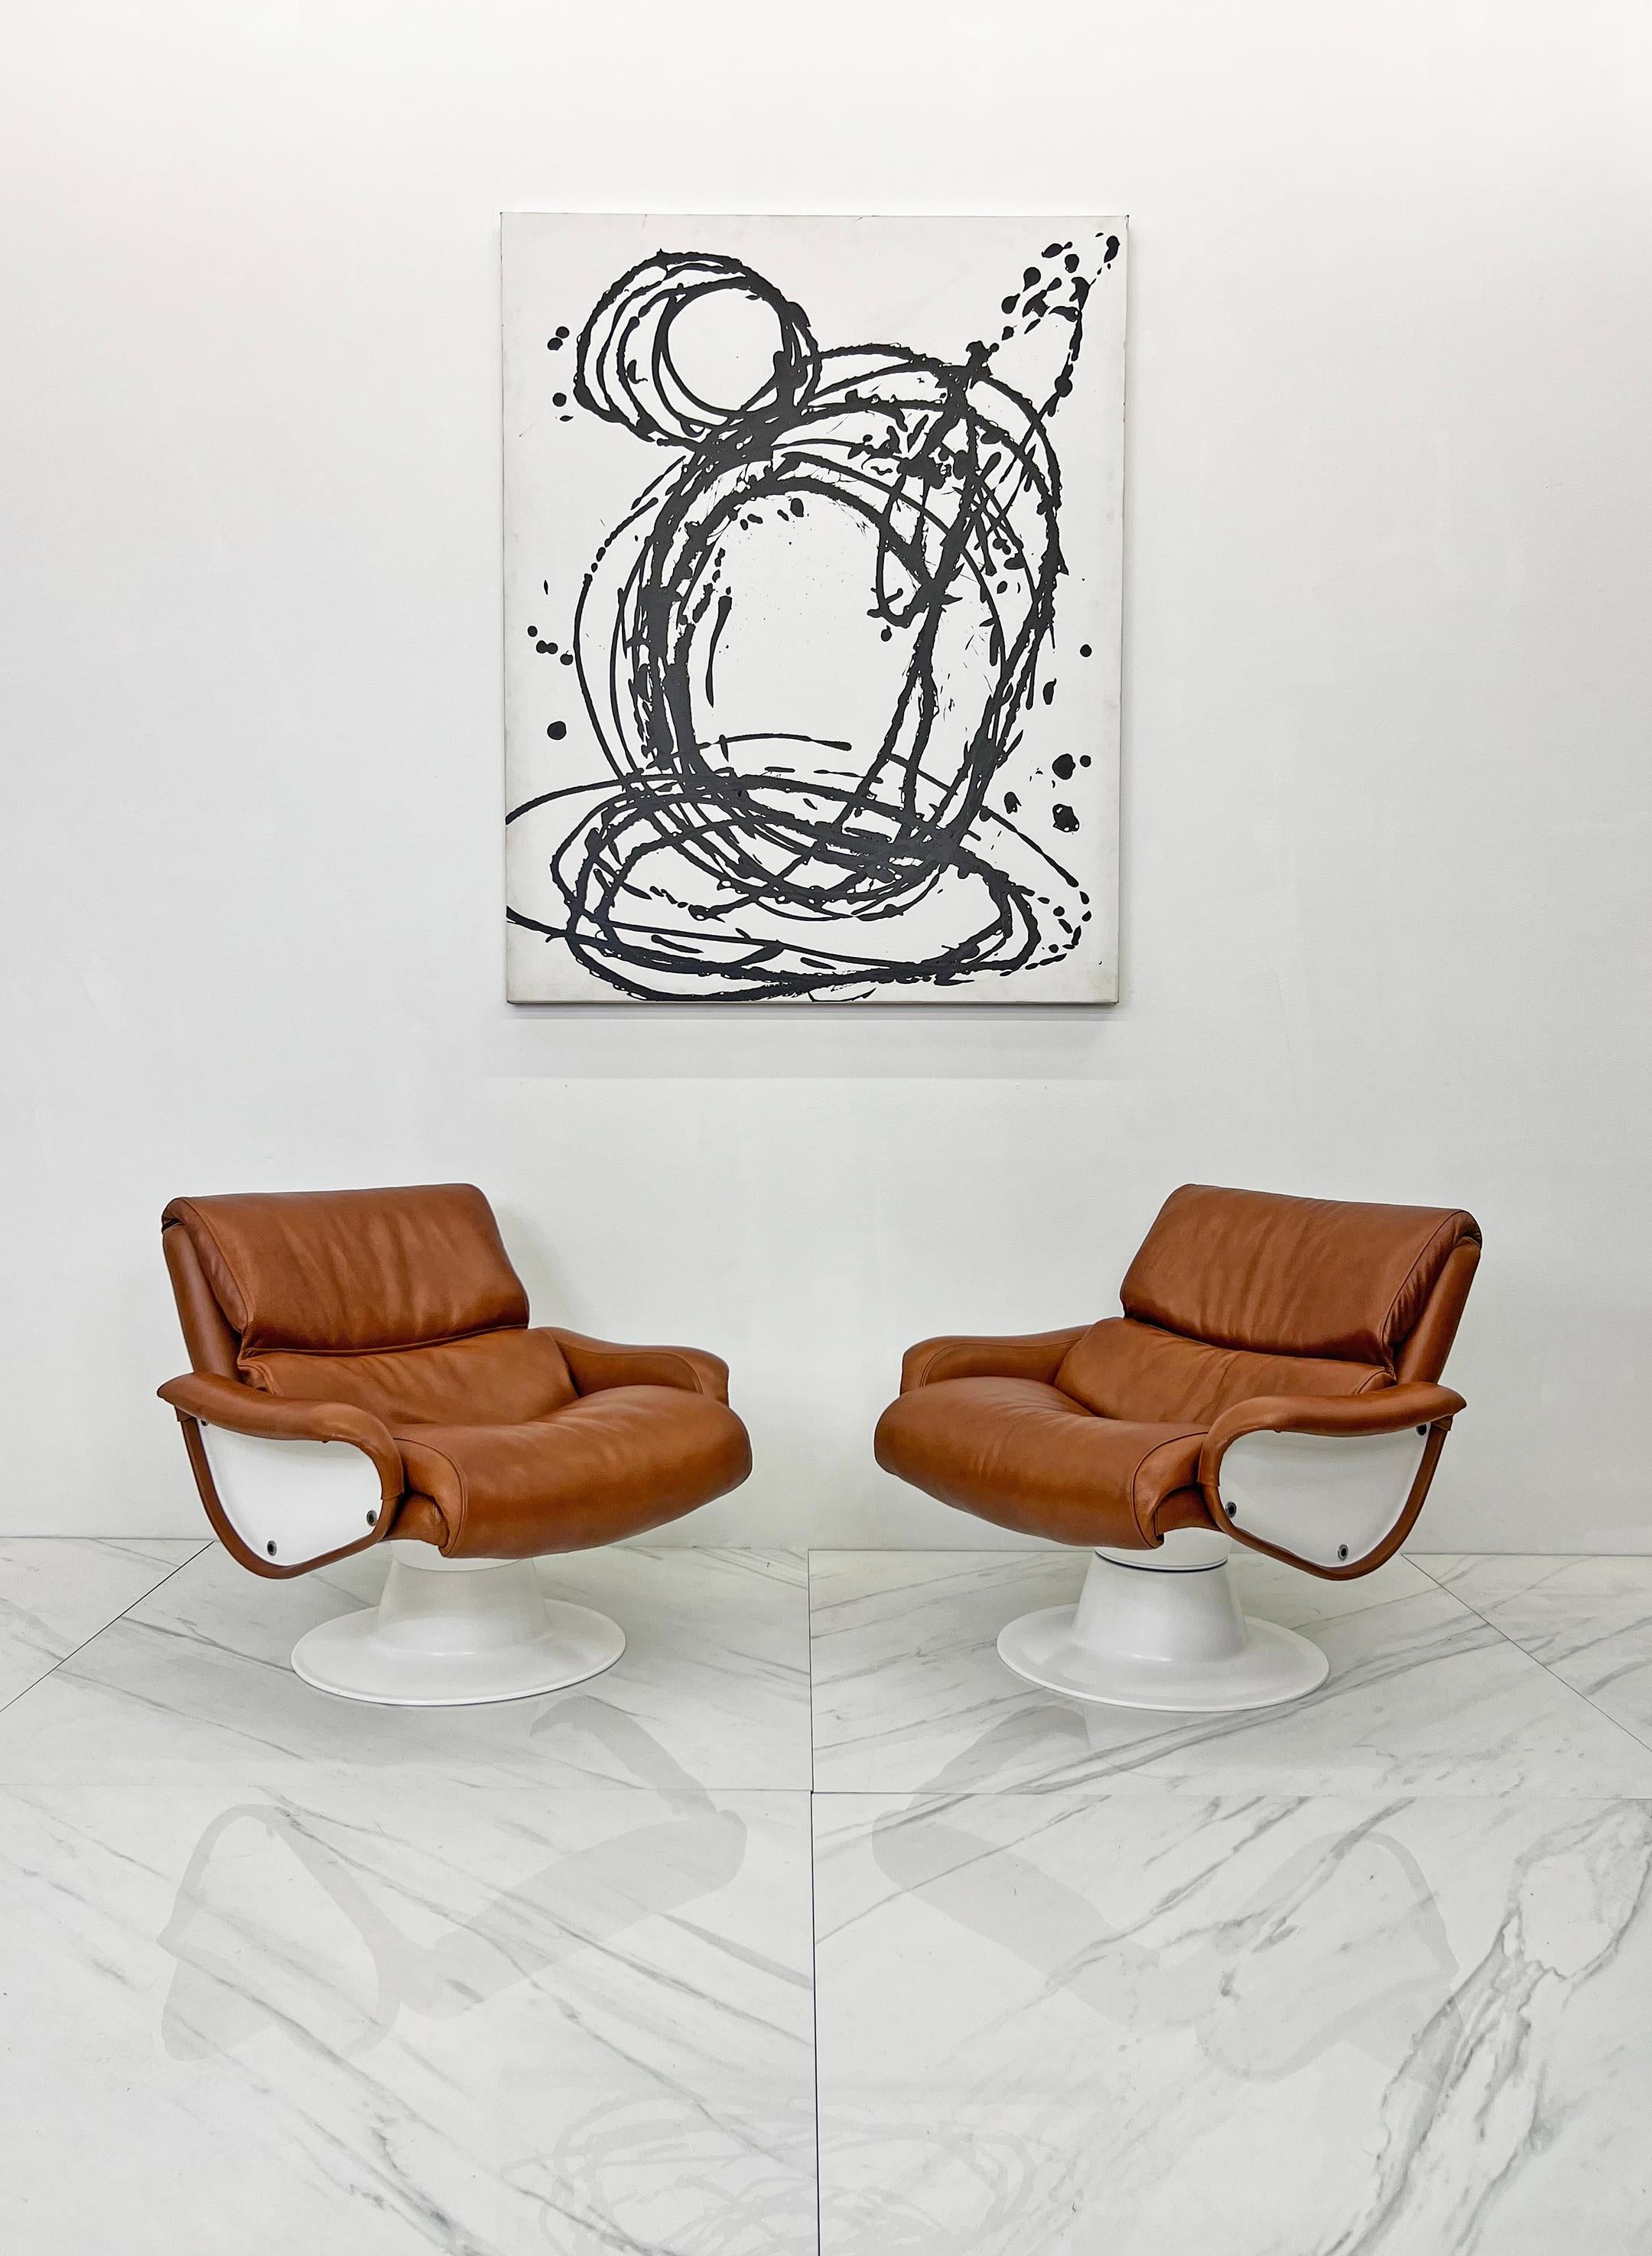 These chairs are iconic Mid-Century Modern design at its finest! These lounge chairs were designed by Yjro Kukkapuro for Haimi, Finland in 1966. They feature a fiberglass body, and sumptuous cognac leather. Priced per pair, we currently have 2 pairs